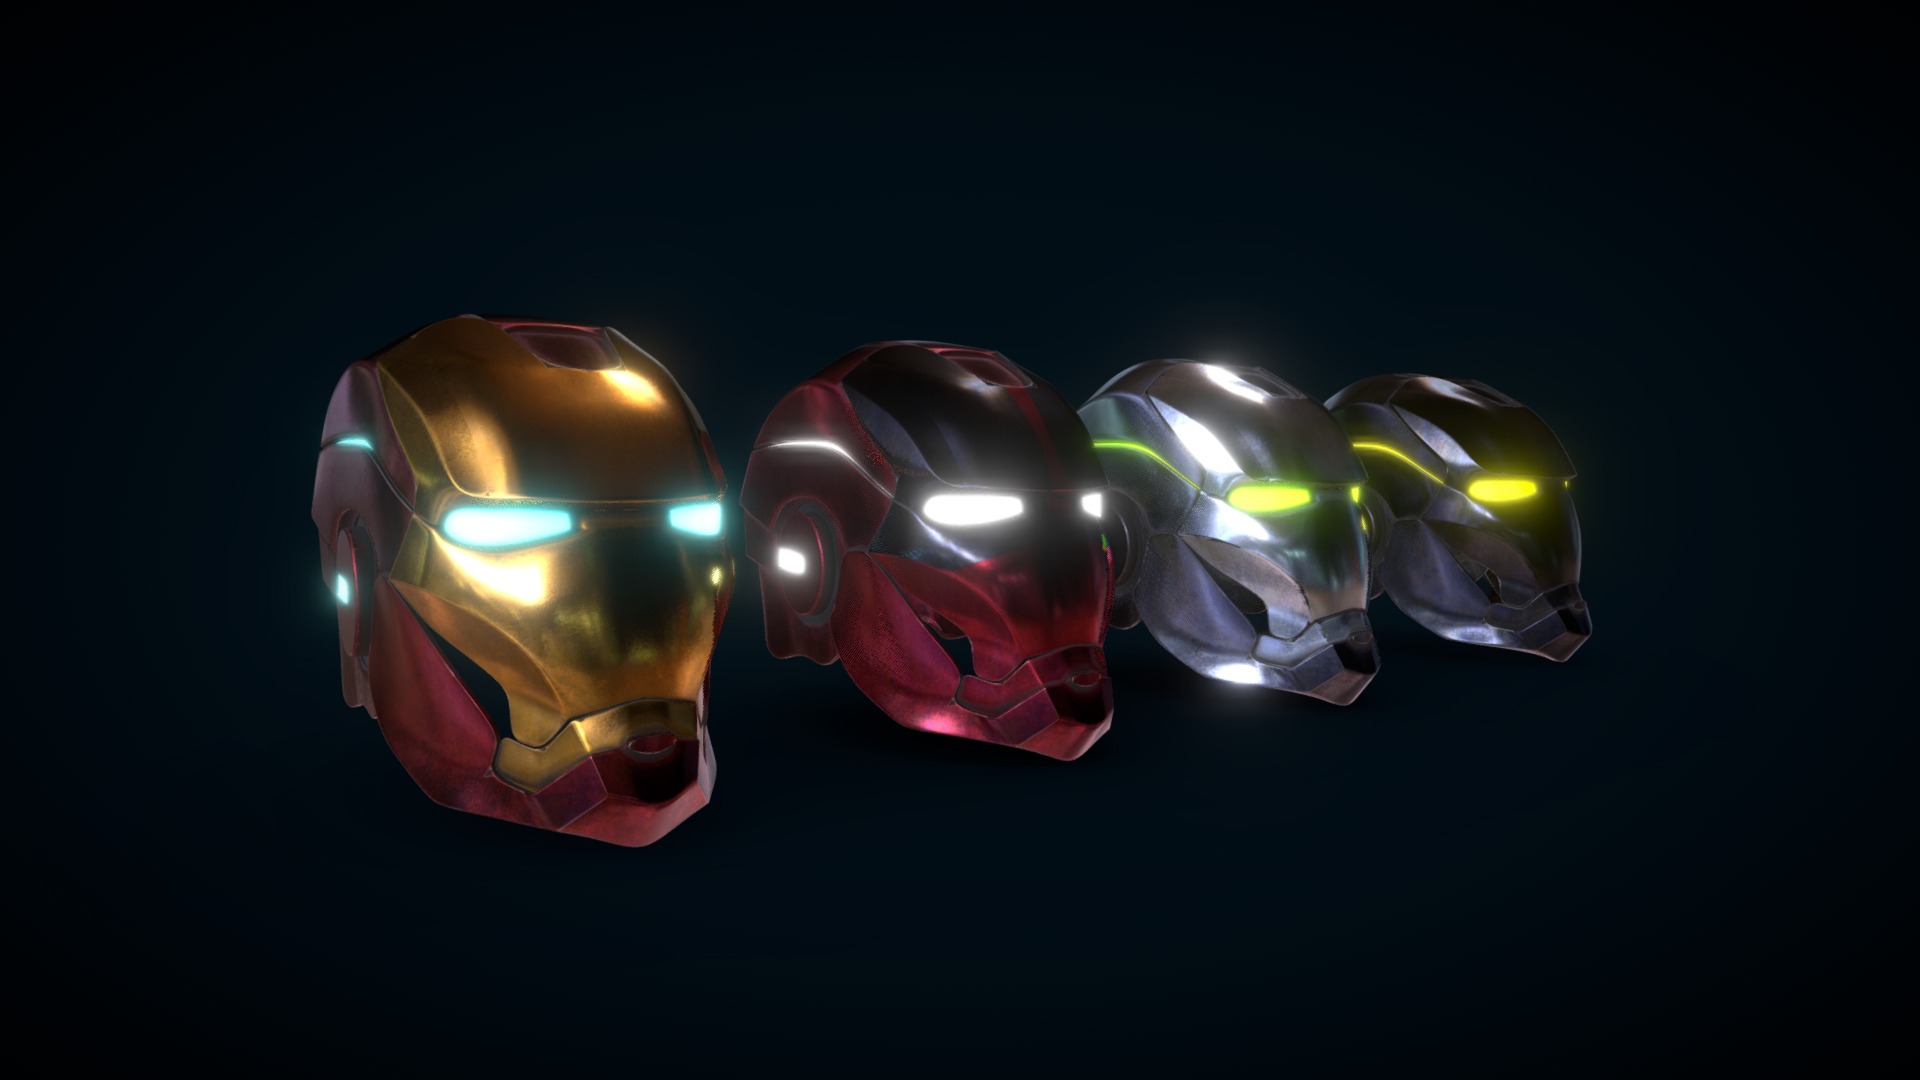 Renders in : https://www.artstation.com/artwork/wRkAw

Iron Man was always one of my favourite heroes from Marvel, so I am in a personal proyect to do the full model of him.

I started with the helmet and was so fun to work in something you like.

I decided to make different textures for this one so I created : IronDeadPool, IronGenji and IronBatman - Iron Man Helmet prototypes - 3D model by AleX (@Omnilatigo96) 3d model